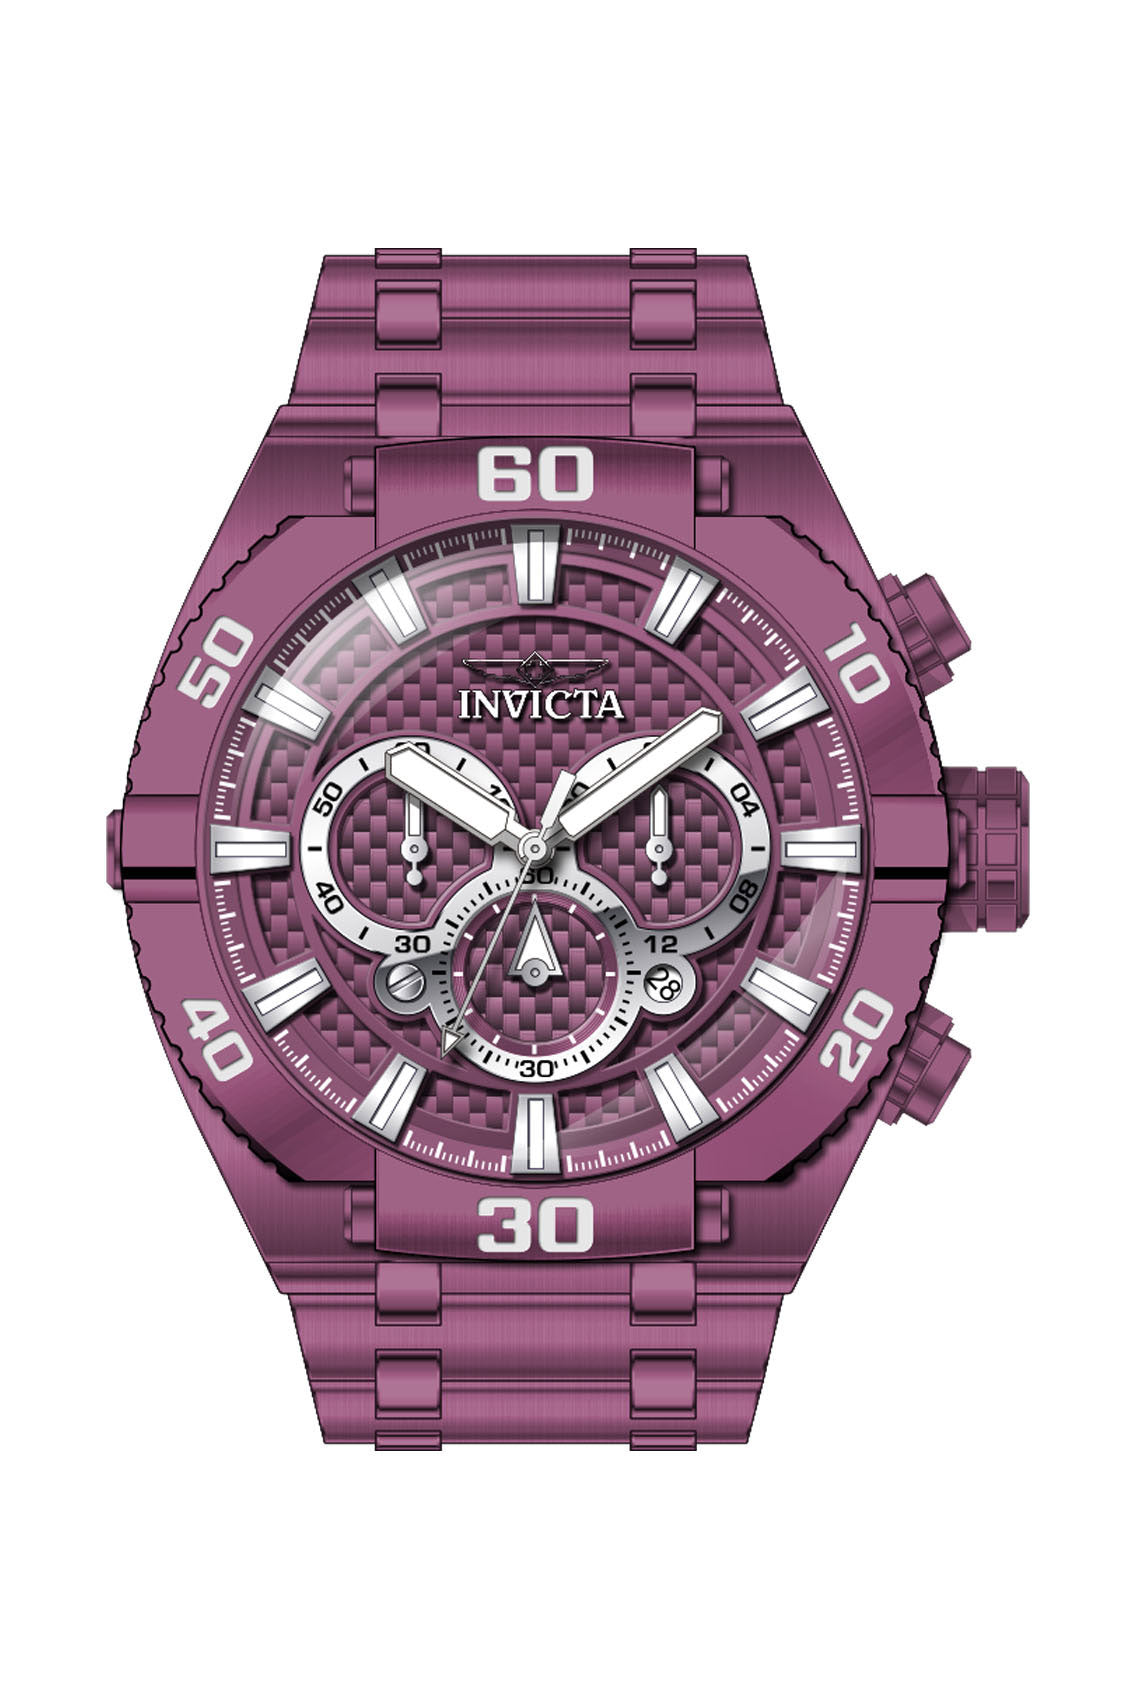 Band for Invicta Coalition Forces Men 40917